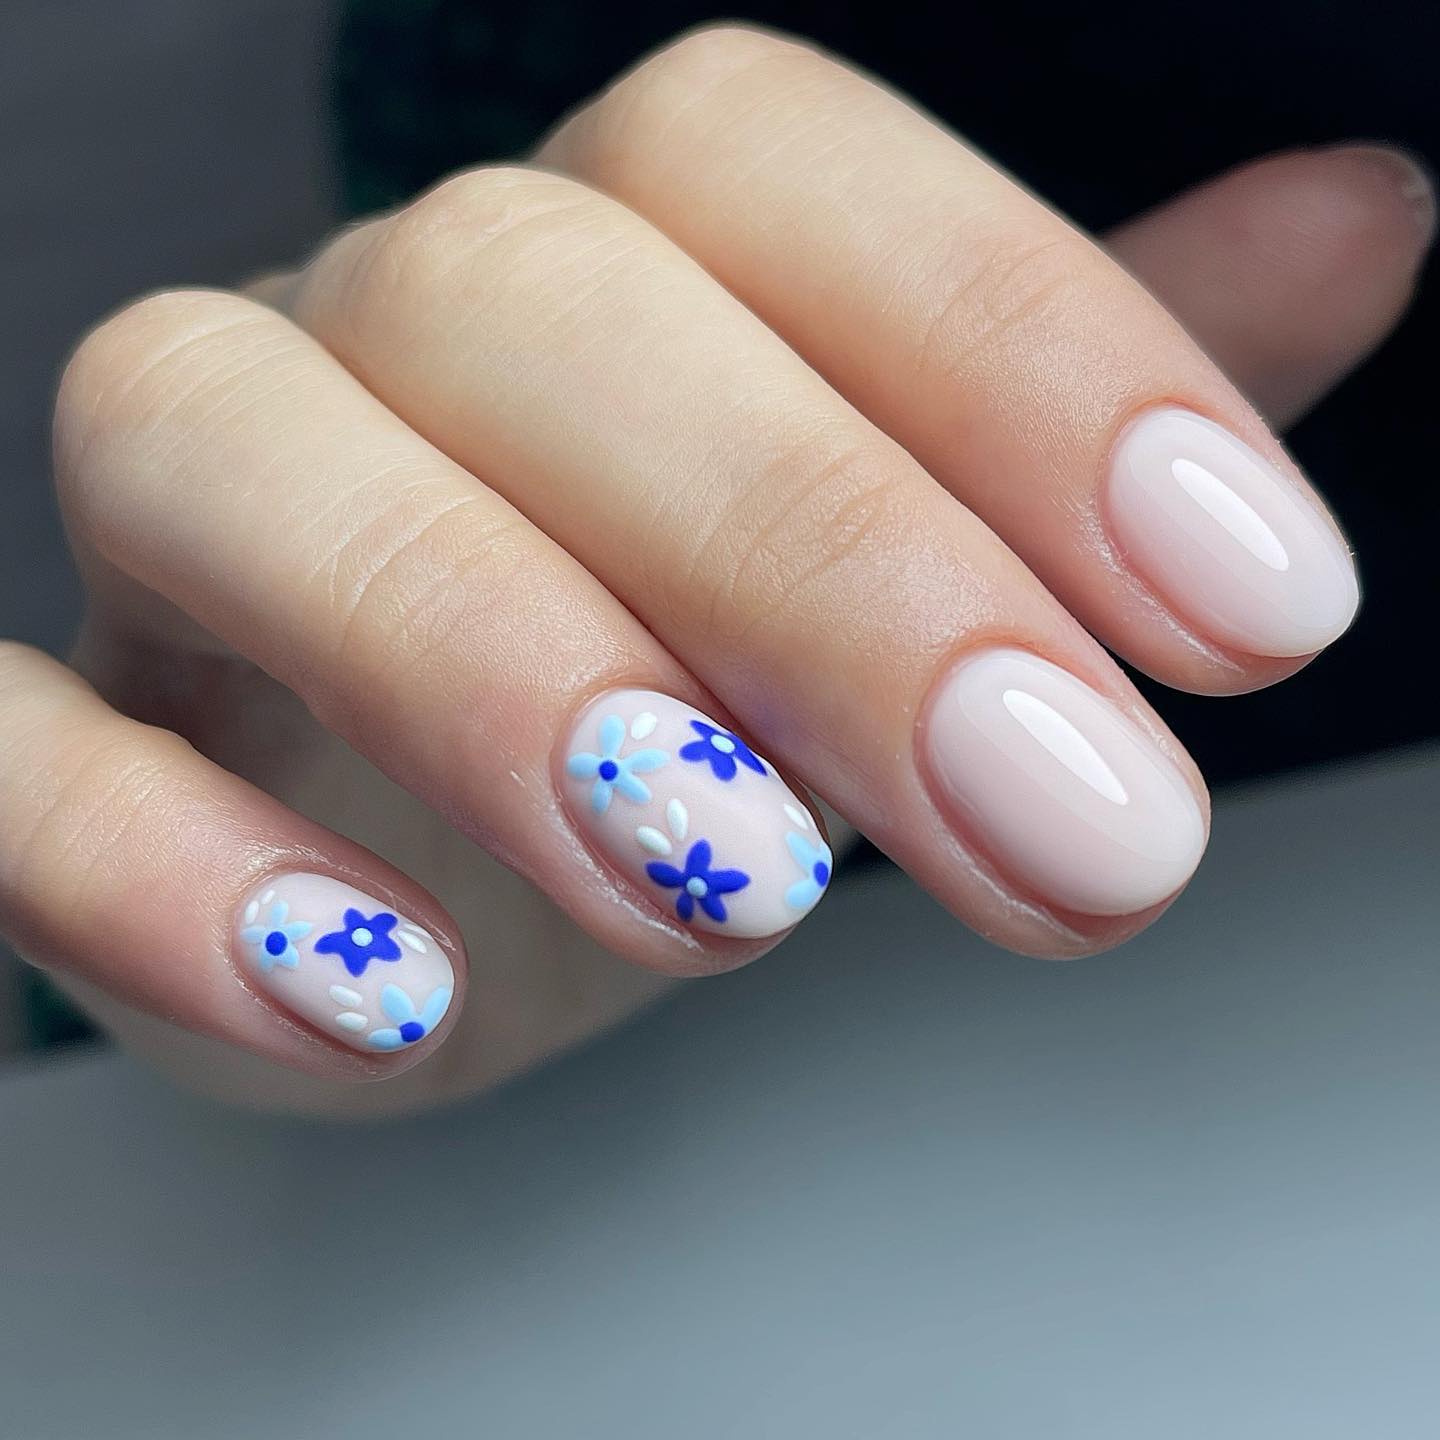 Short oval nails can be brighten up with floral accent nails. The color of nail polish, which is transparent white, is already an amazing one but you can use a matte nail polish for your accent nails. On top of them, you need to draw some bright and dark blue flowers to look cuter.